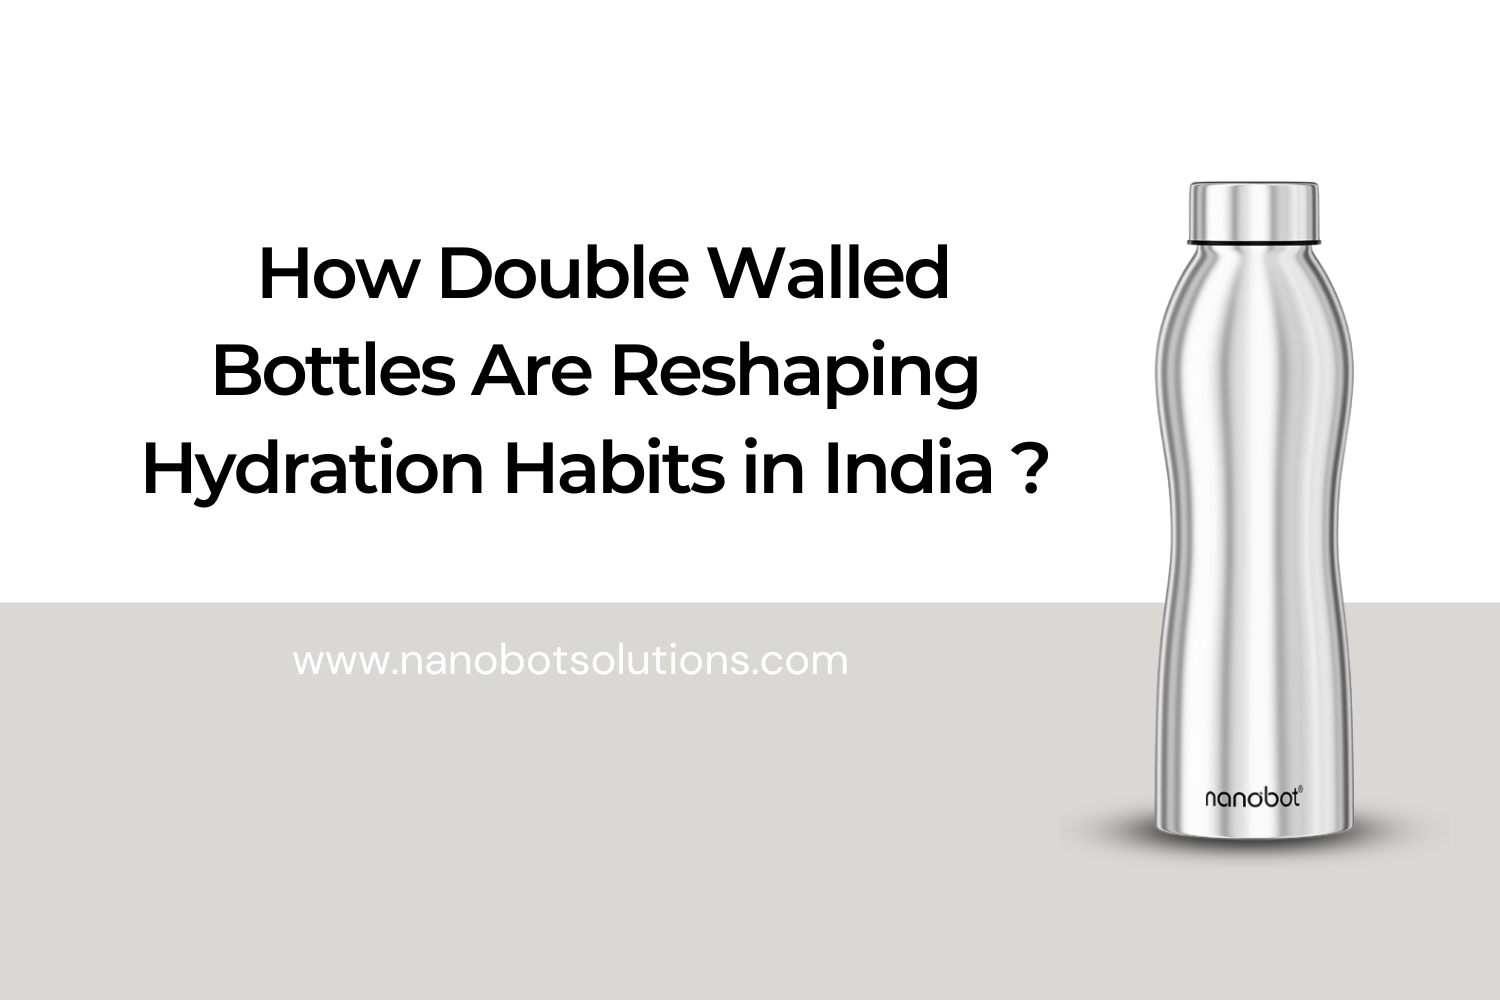 How-Double-Walled-Bottles-Are-Reshaping-Hydration-Habits-in-India